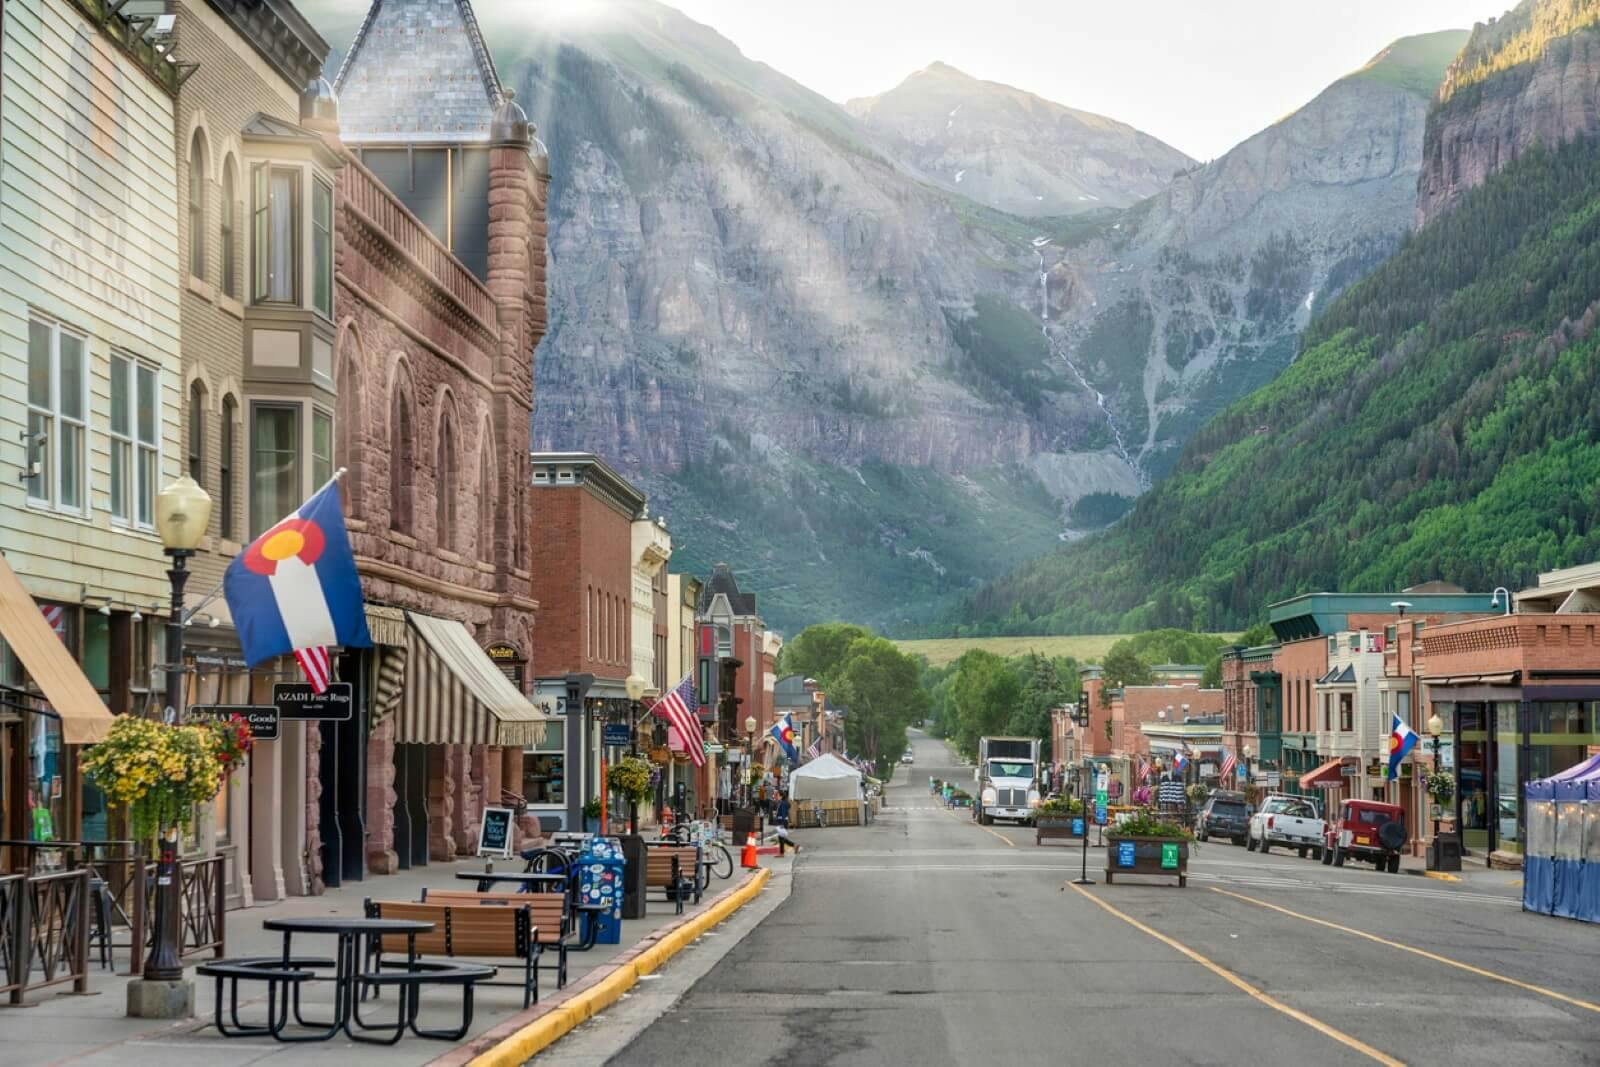 The mountain town of Telluride in Colorado